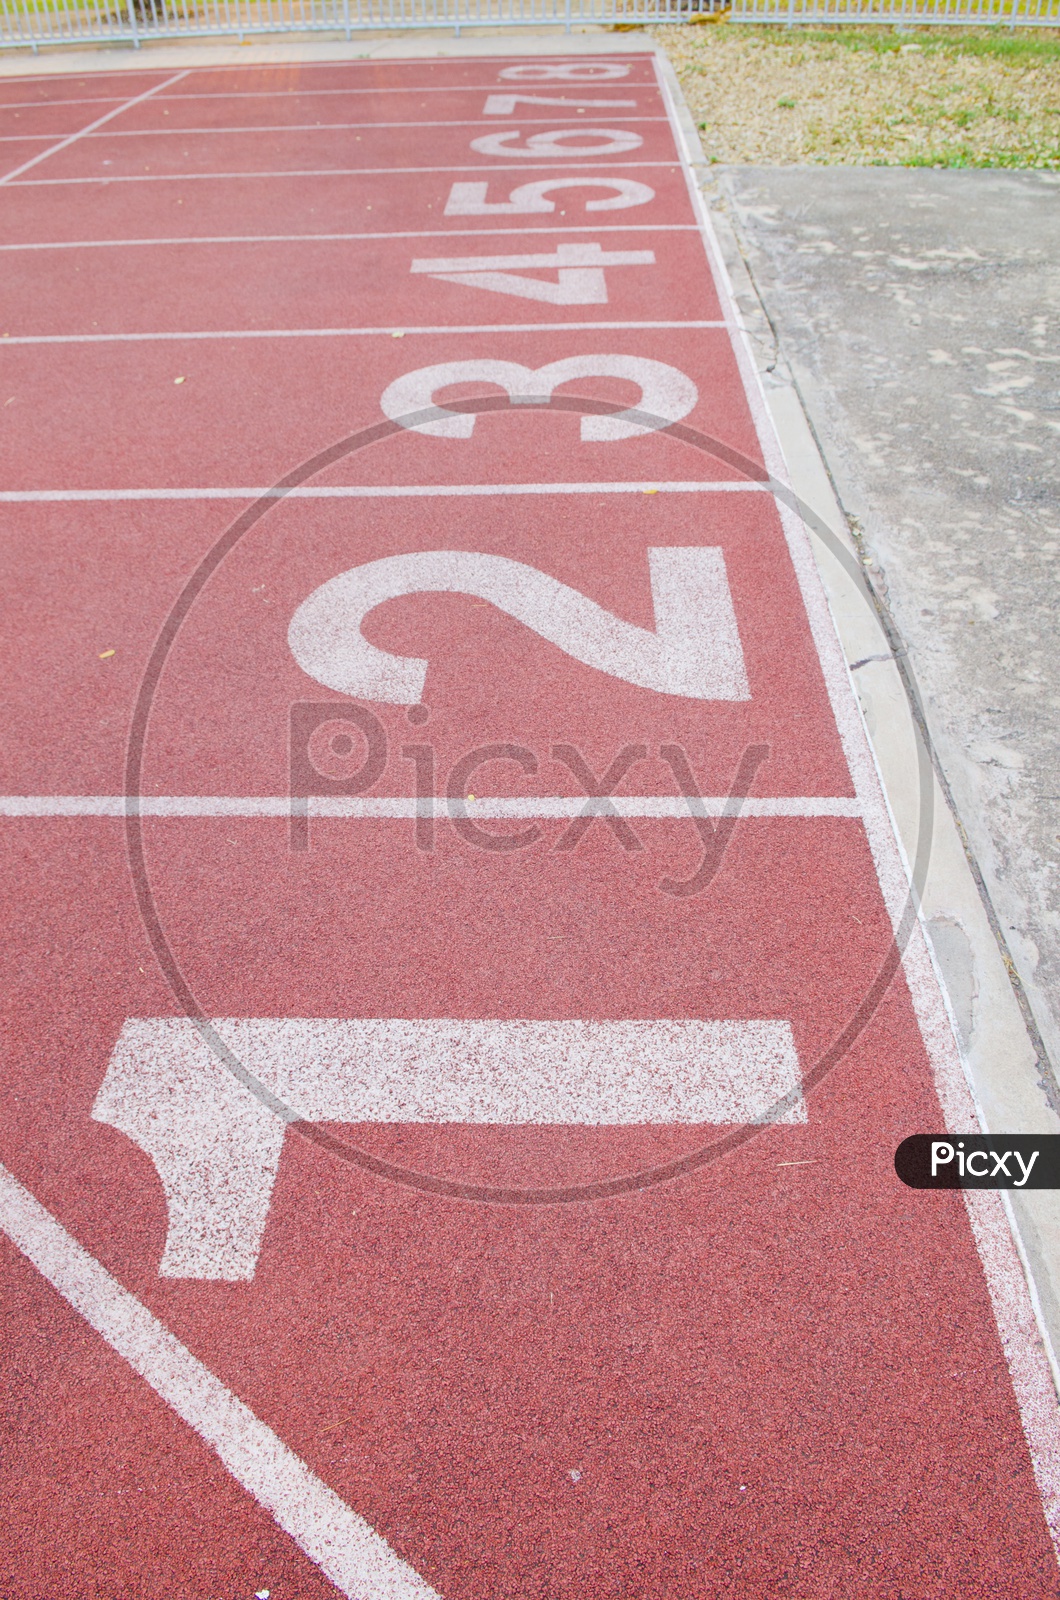 Running Track In a Stadium With Numbers